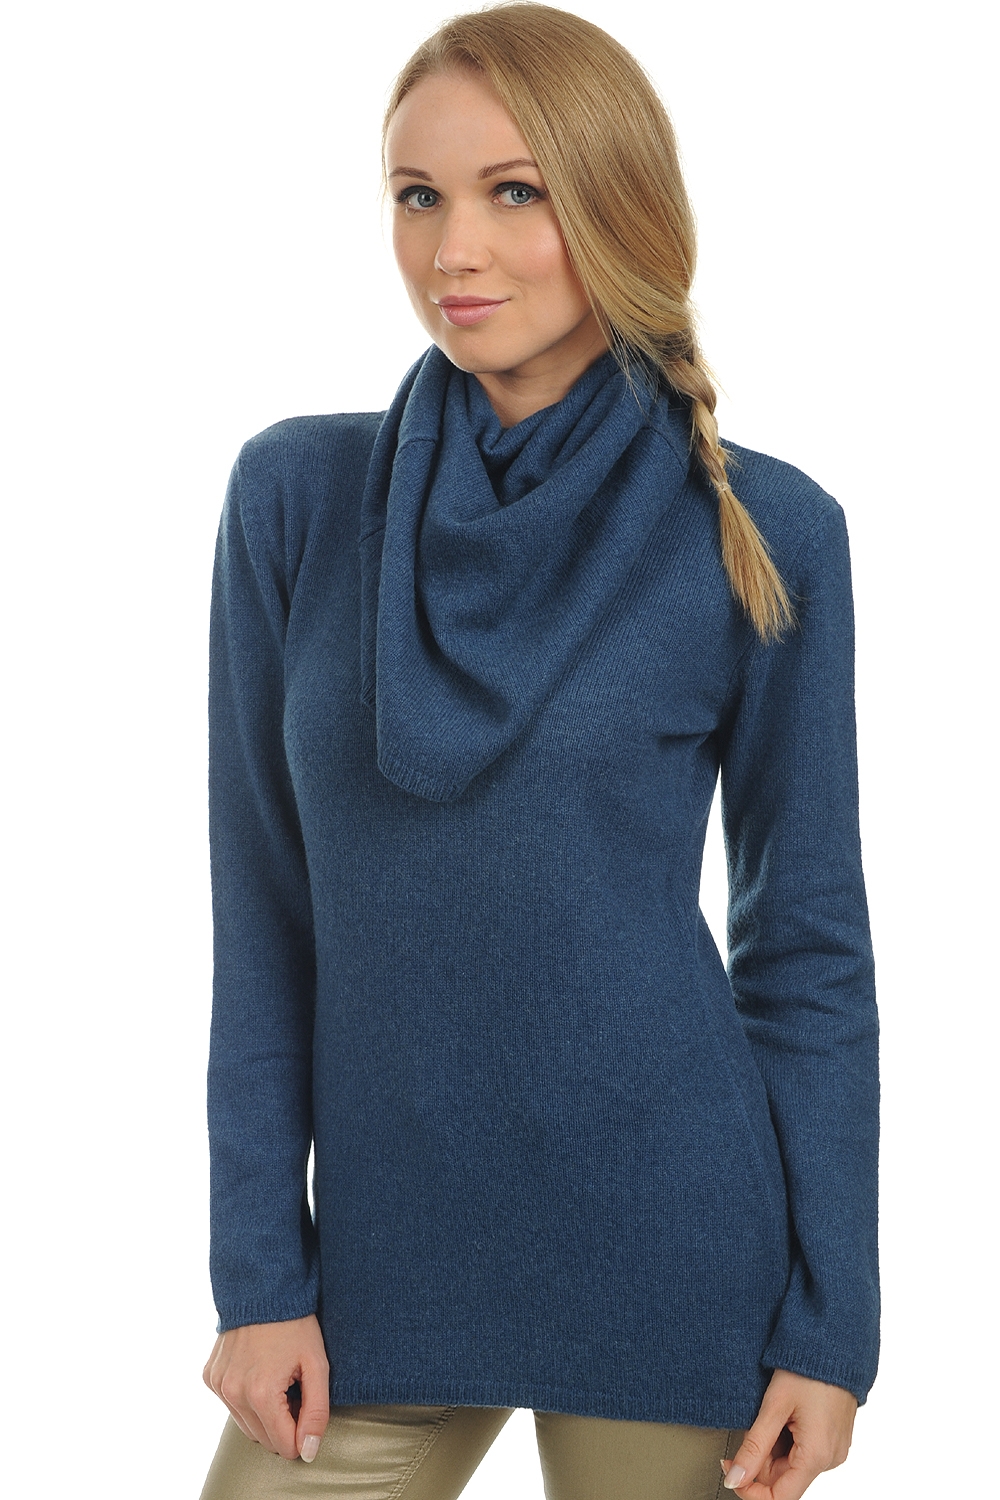 Yak pull femme col roule yness bleu stellaire s